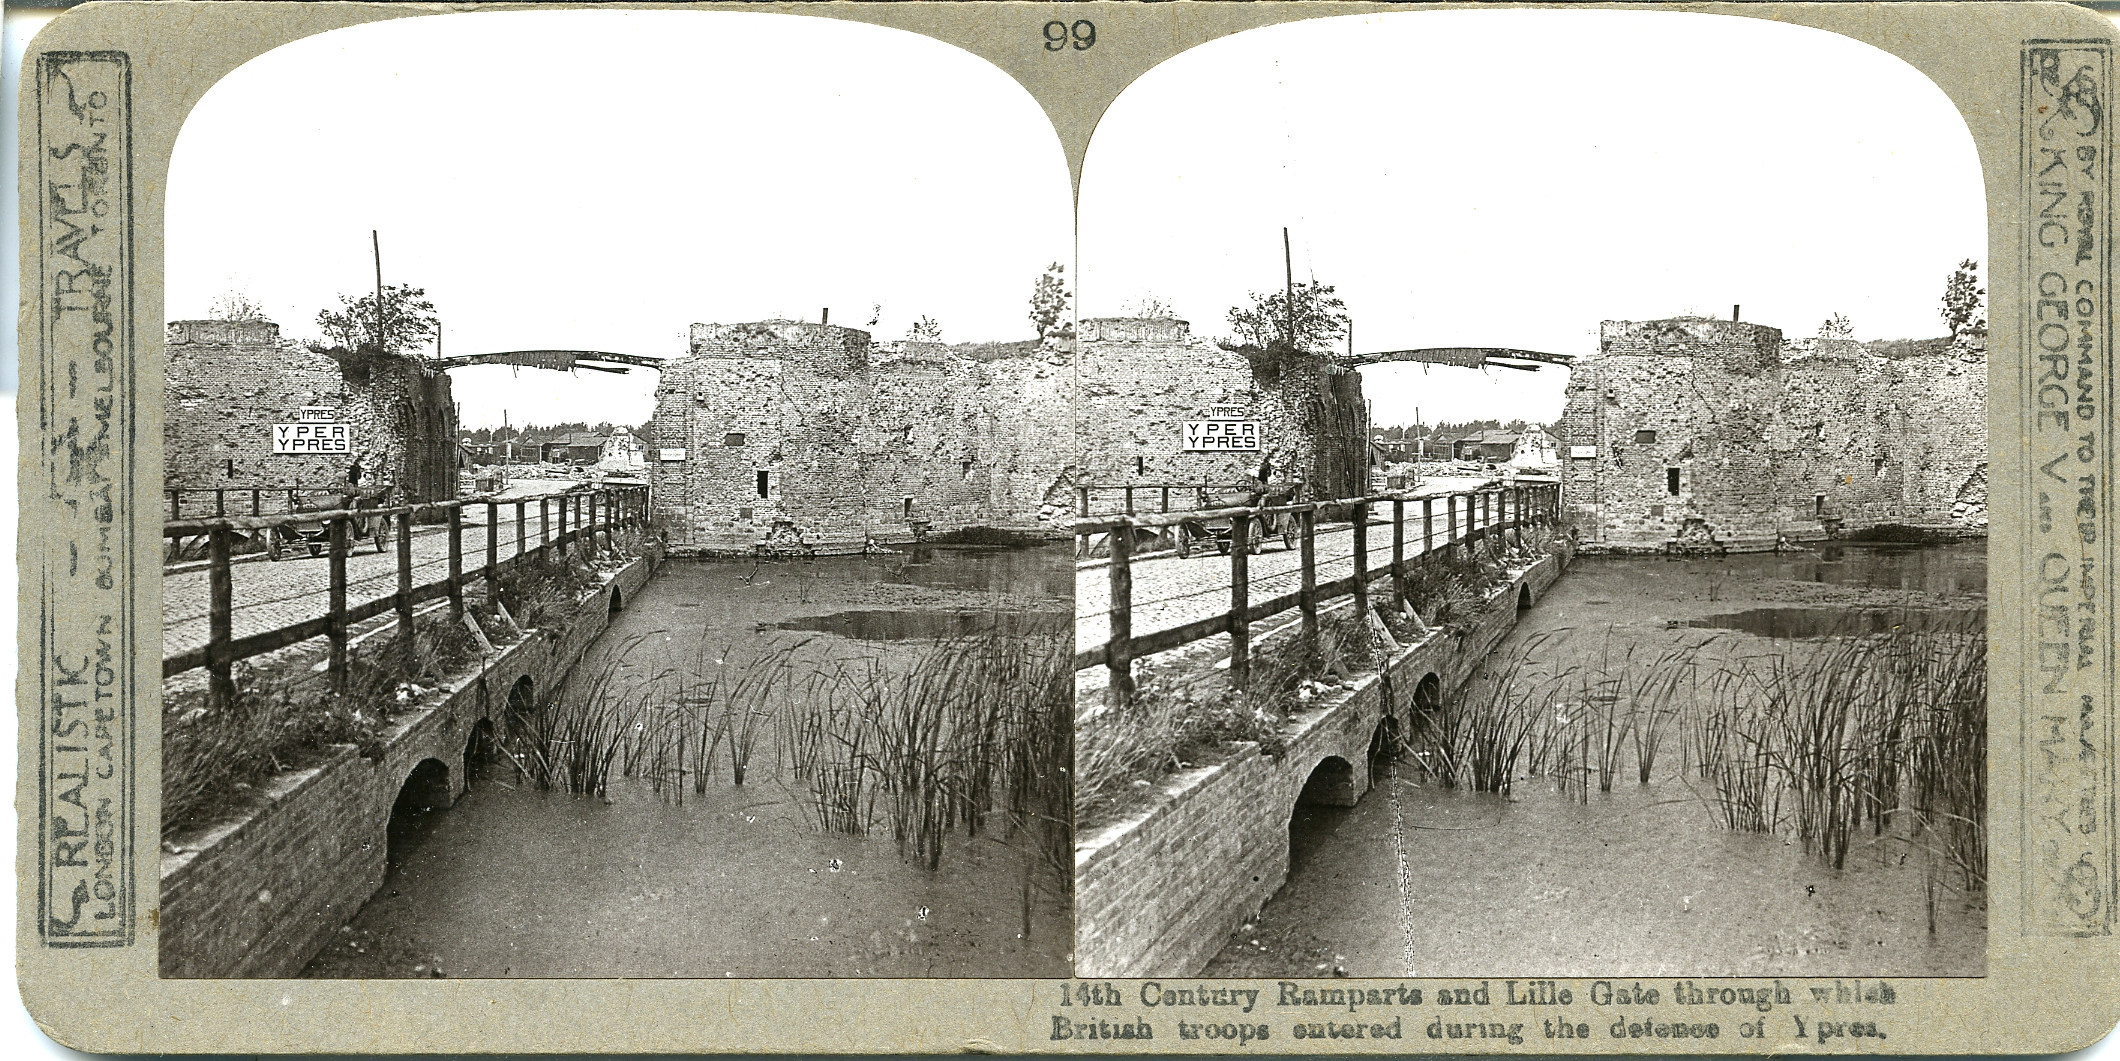 14th century walls & Lille gate through which British troops entered during defence of Ypres